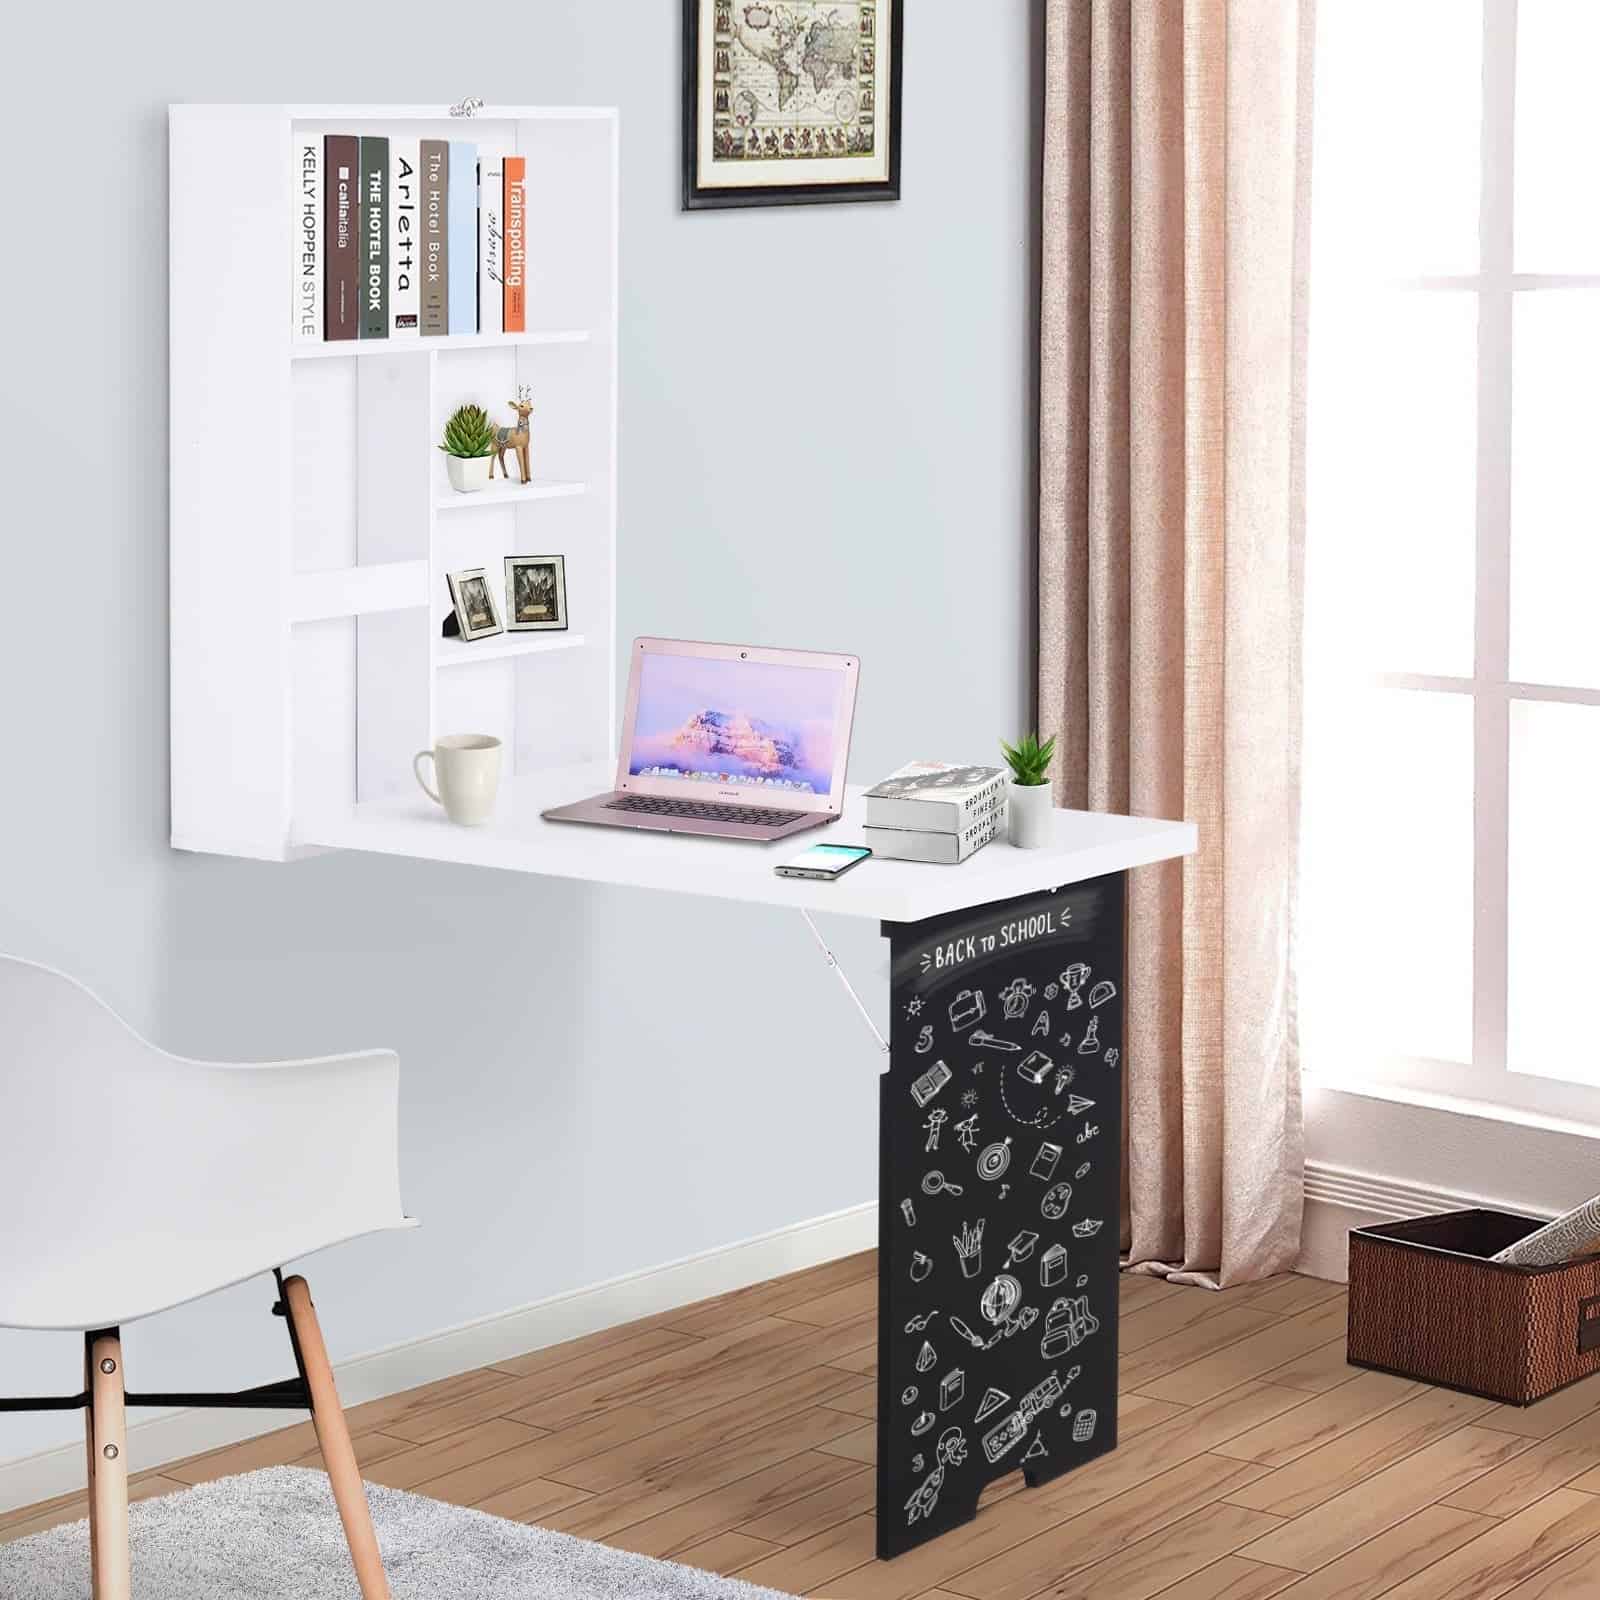 Wall Mounted Desks Can Divide Your Space Well